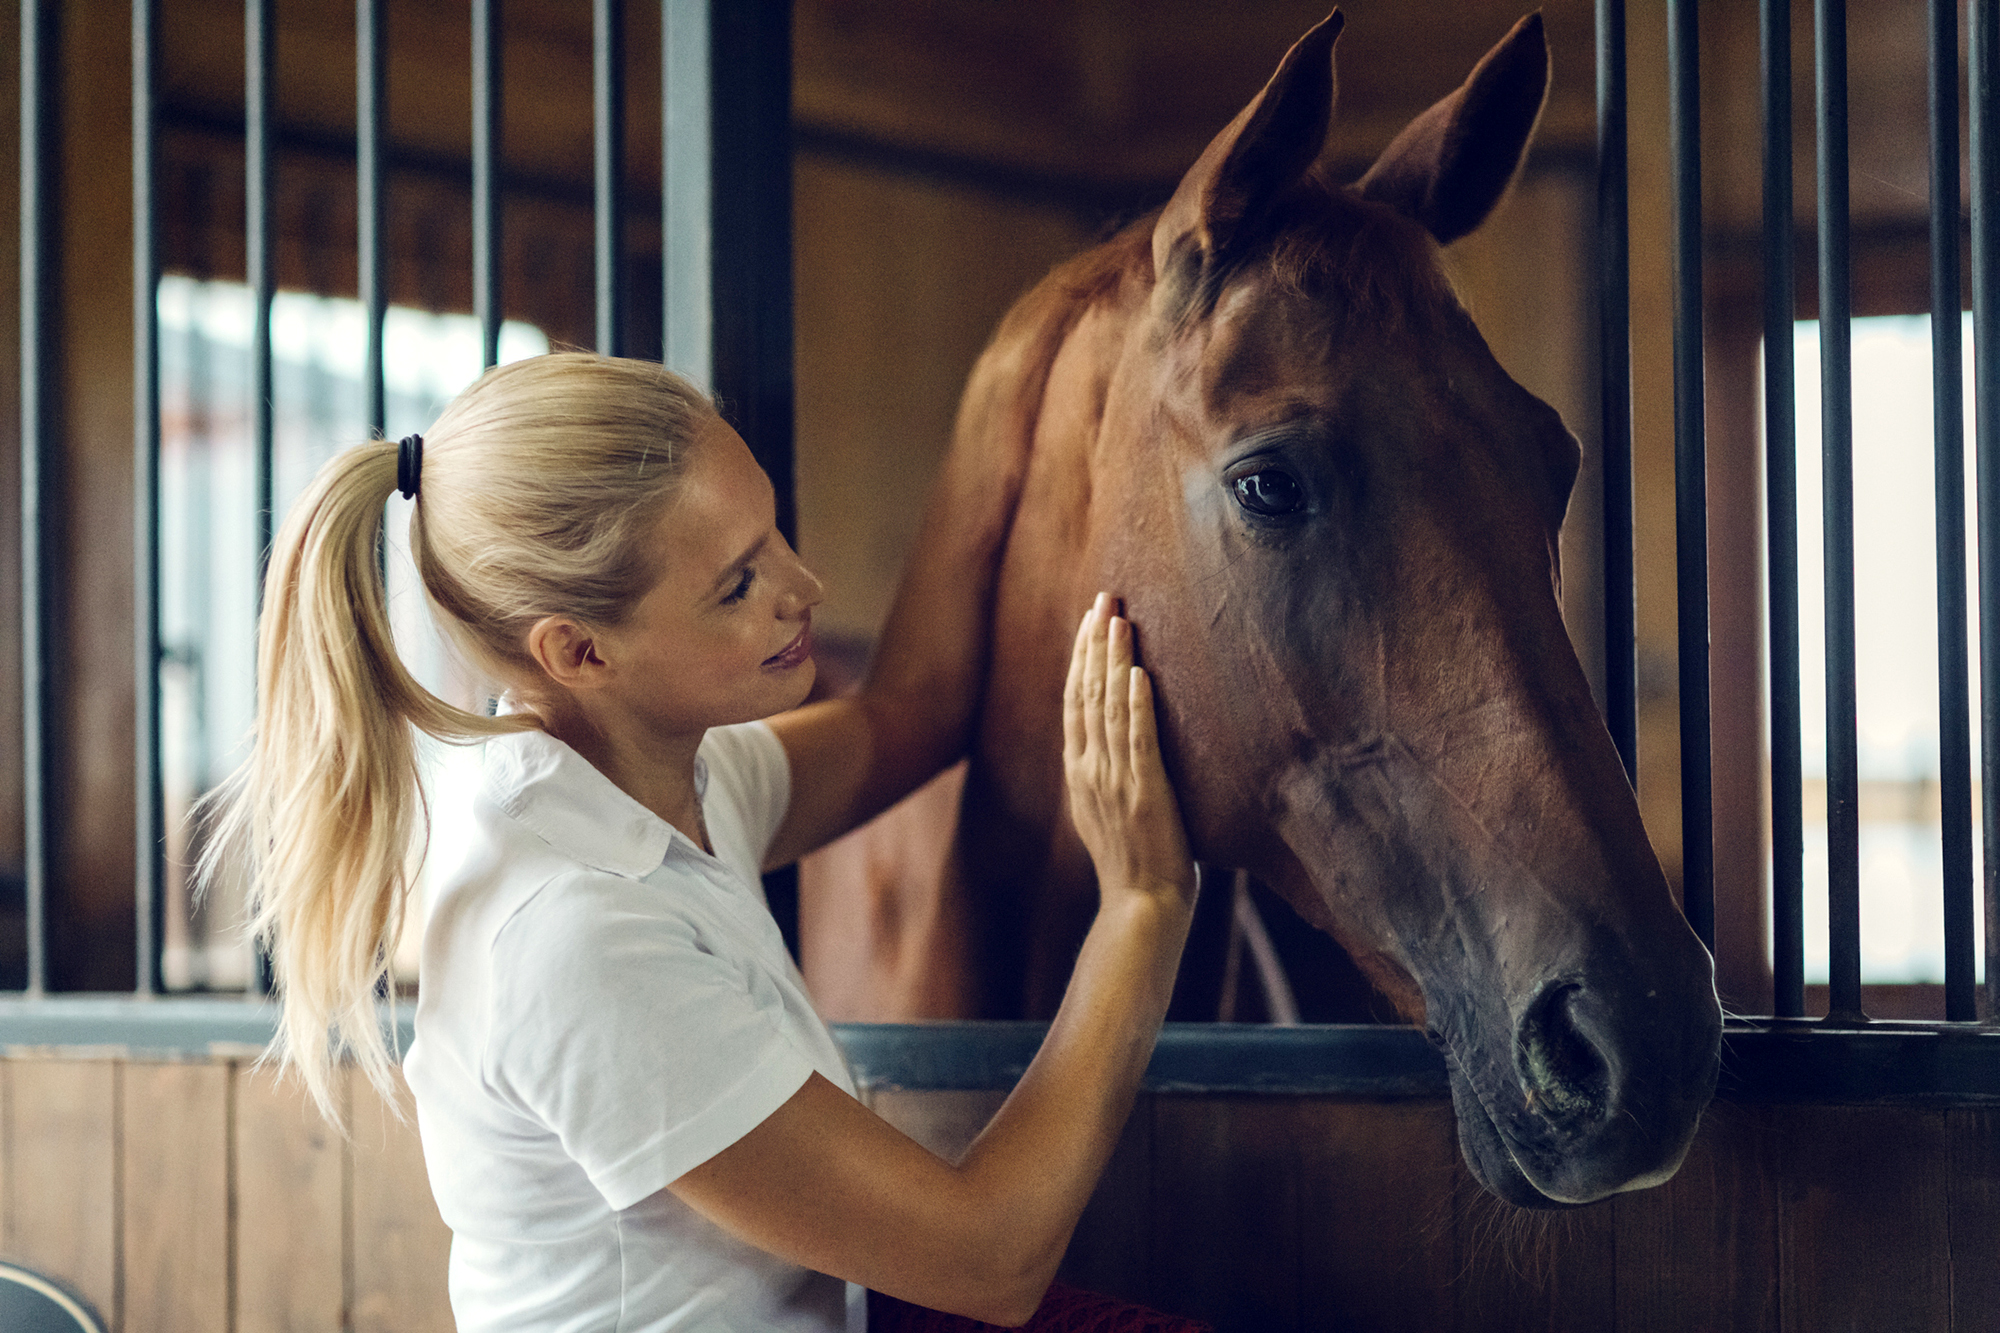 Horses don't love us as much as we love them: study